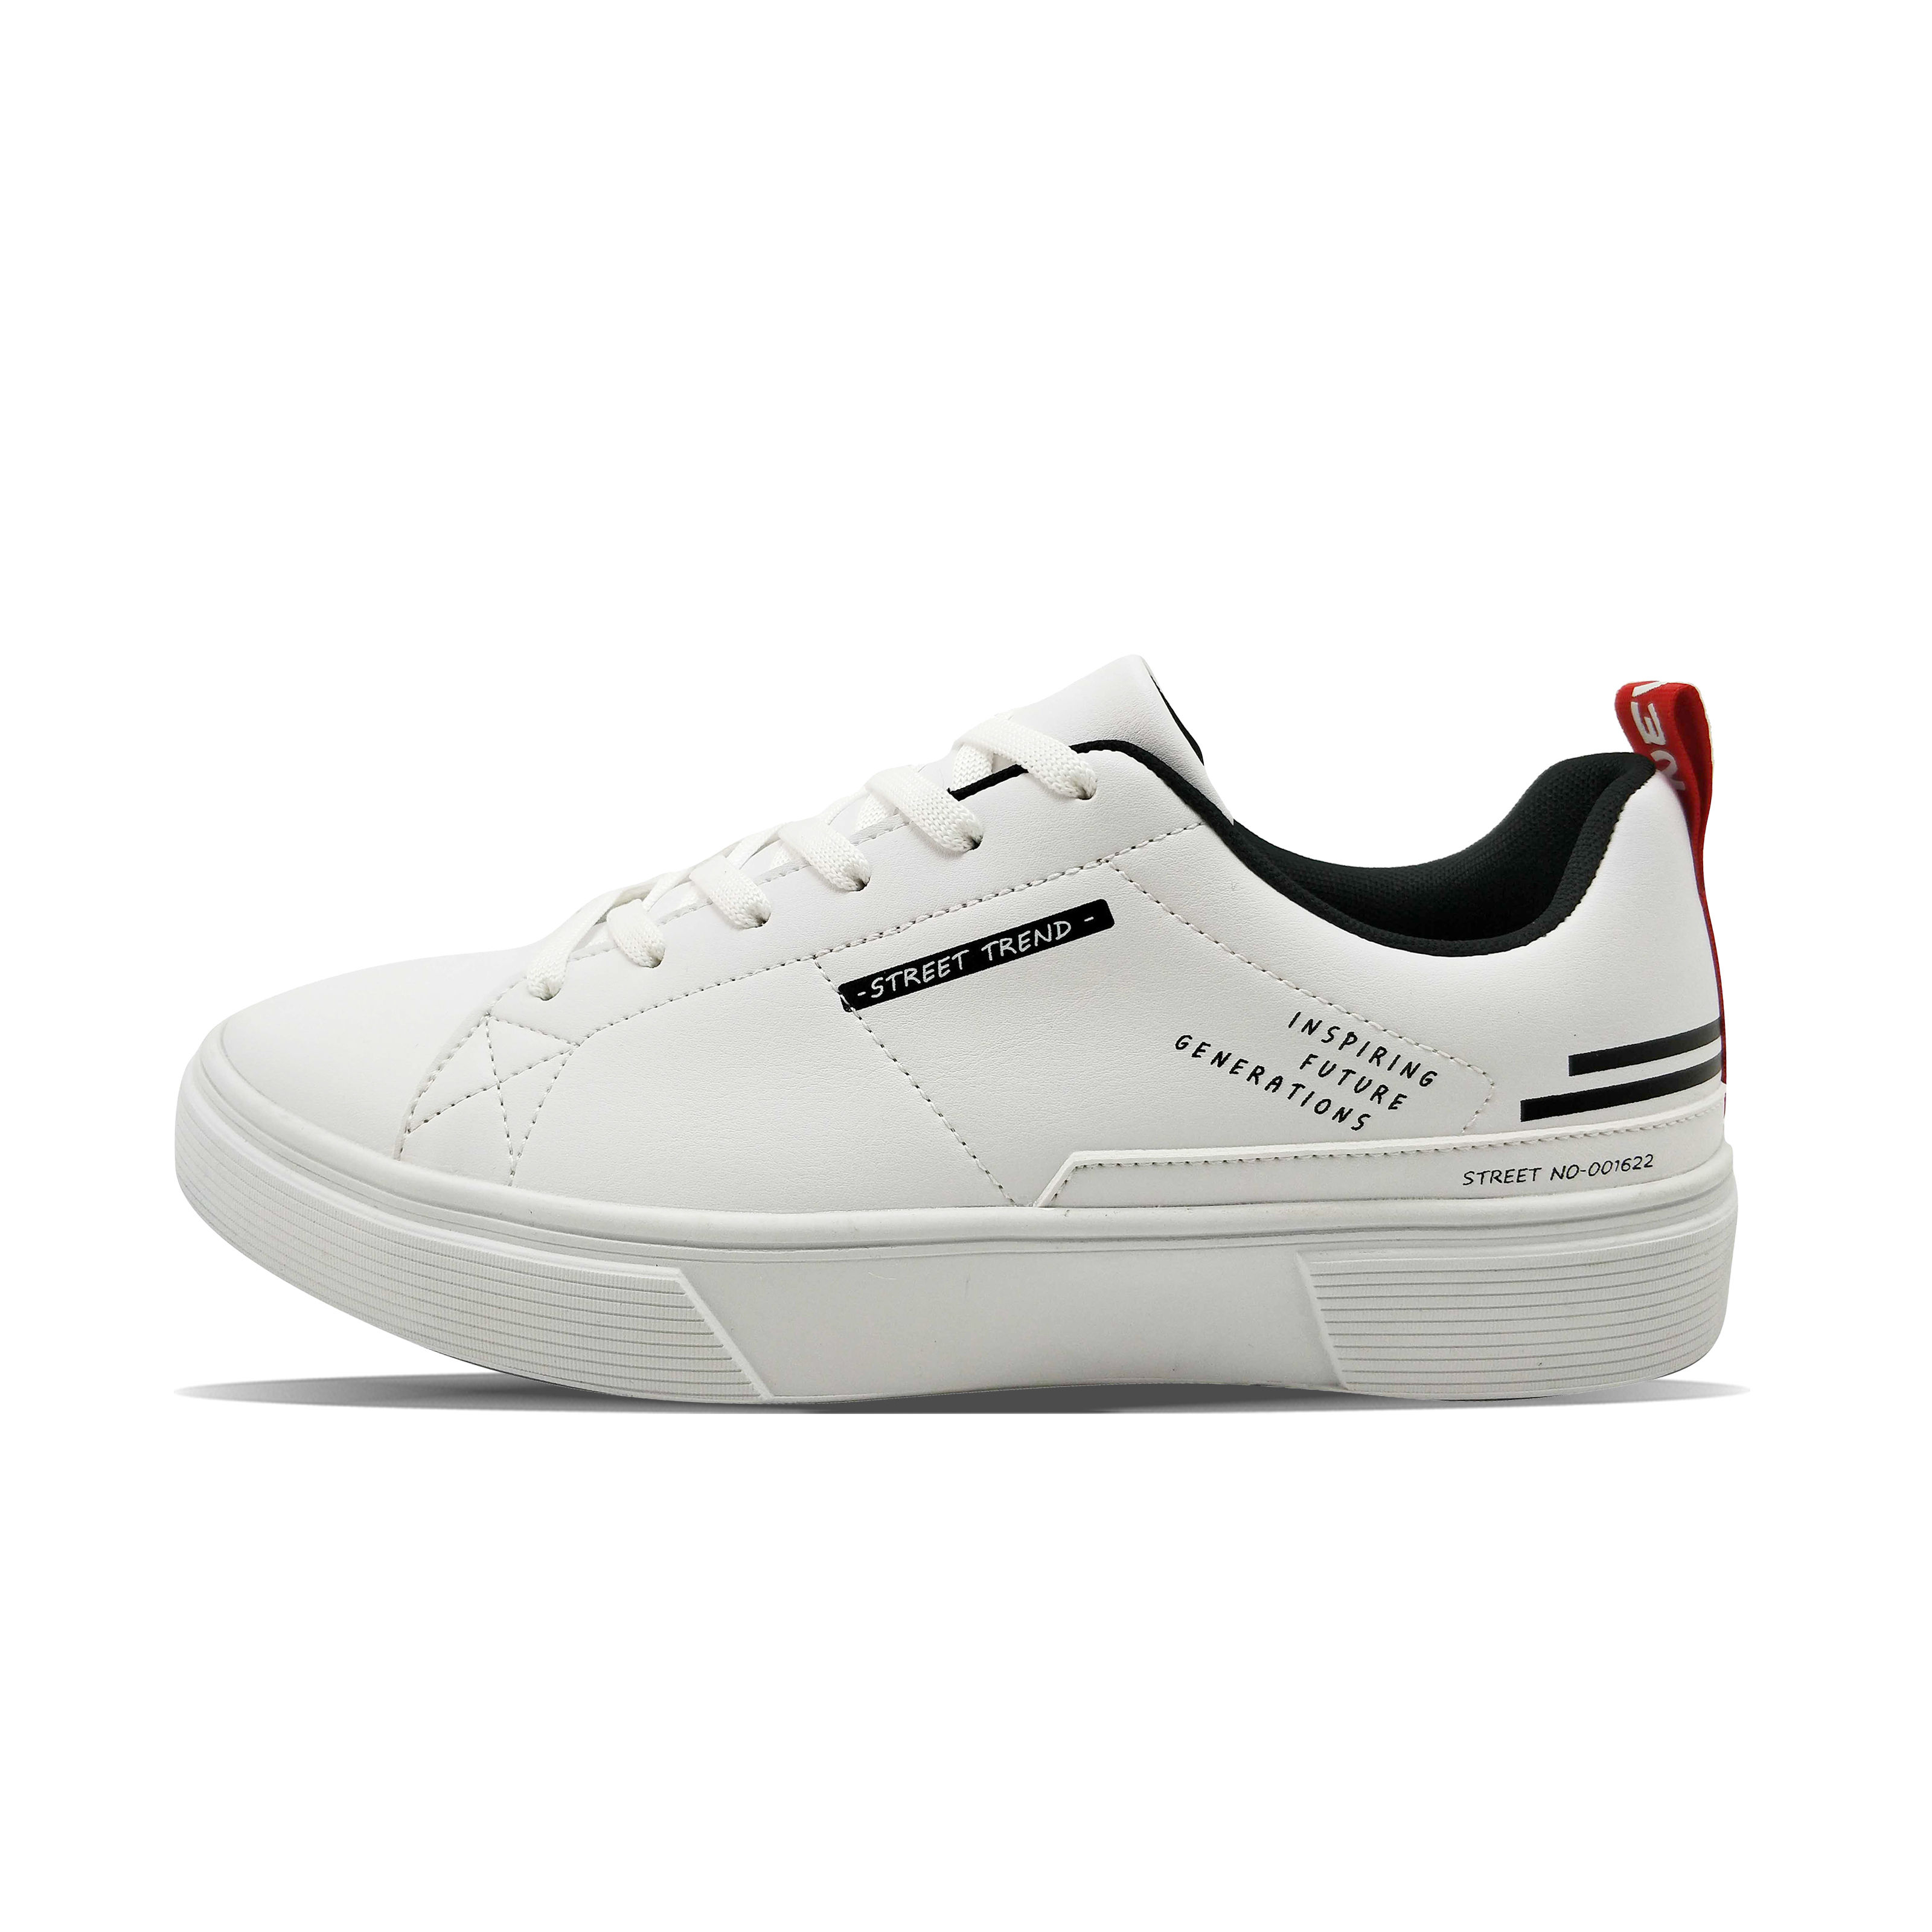 Affordable white men’s casual best factory men’s board shoes